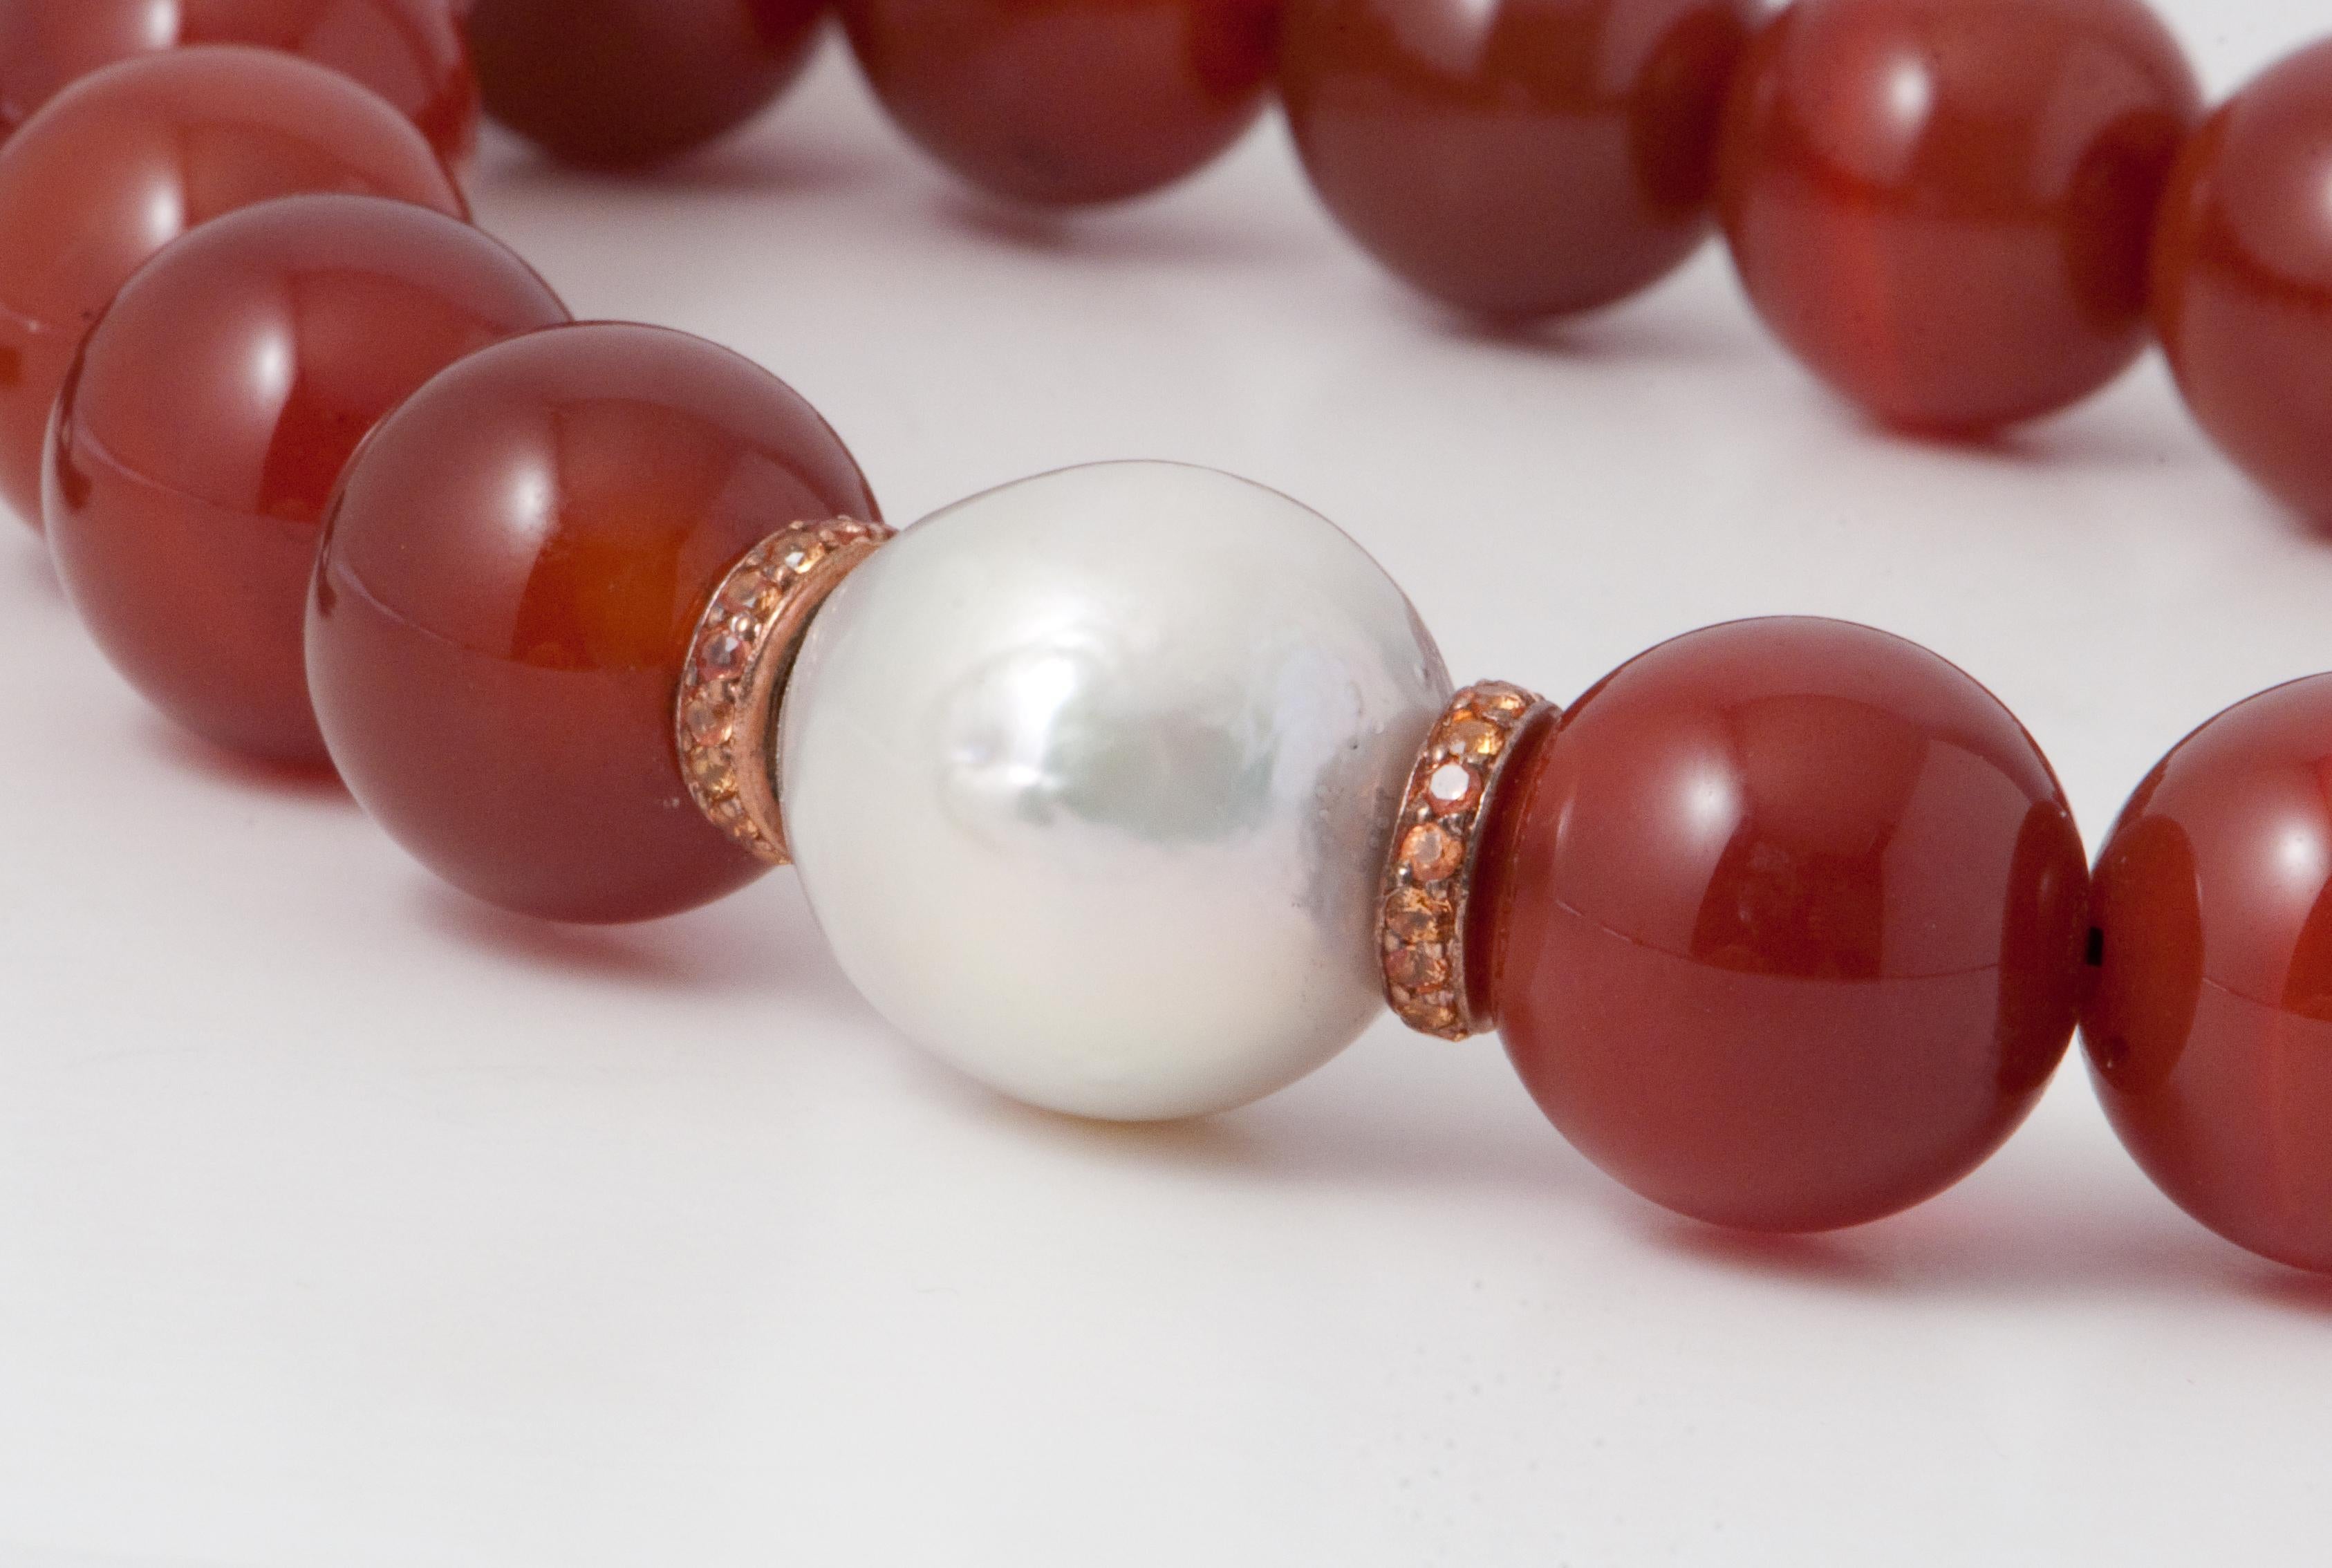 Discover this Terracota Agates, Orange Sapphires and Freshwater Pearl Rose Gold Beaded Necklace.
Terracota Agates
Orange Sapphires
Freshwater Pearl
Bakelite Clasp
Rose Gold 18 Carat 